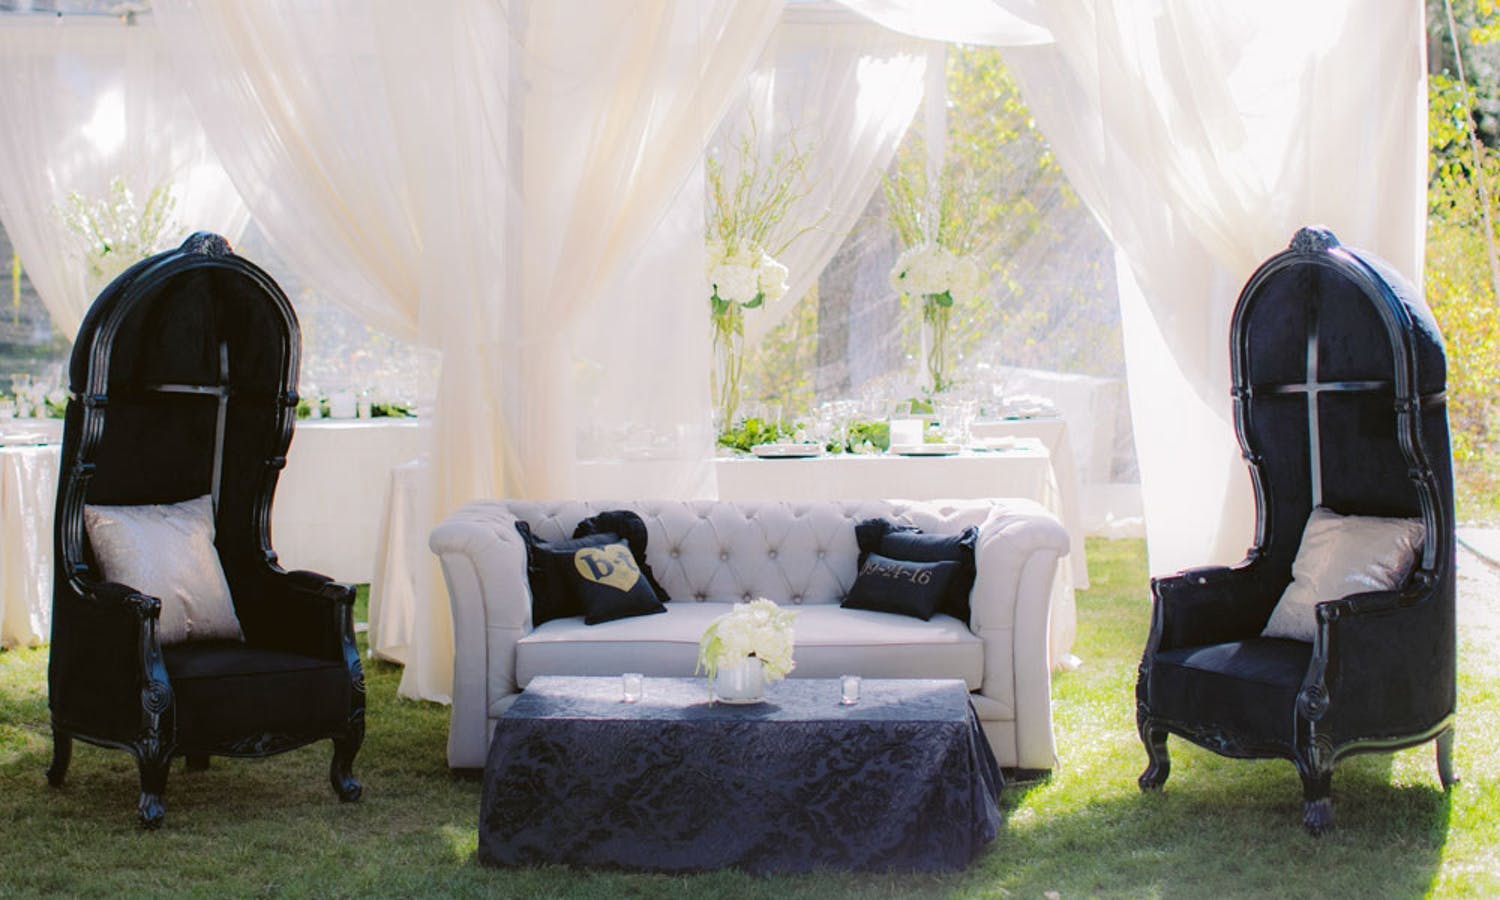 Outdoor Wedding With Gothic Black and White Lounge Area and Ethereal White Tenting | PartySlate